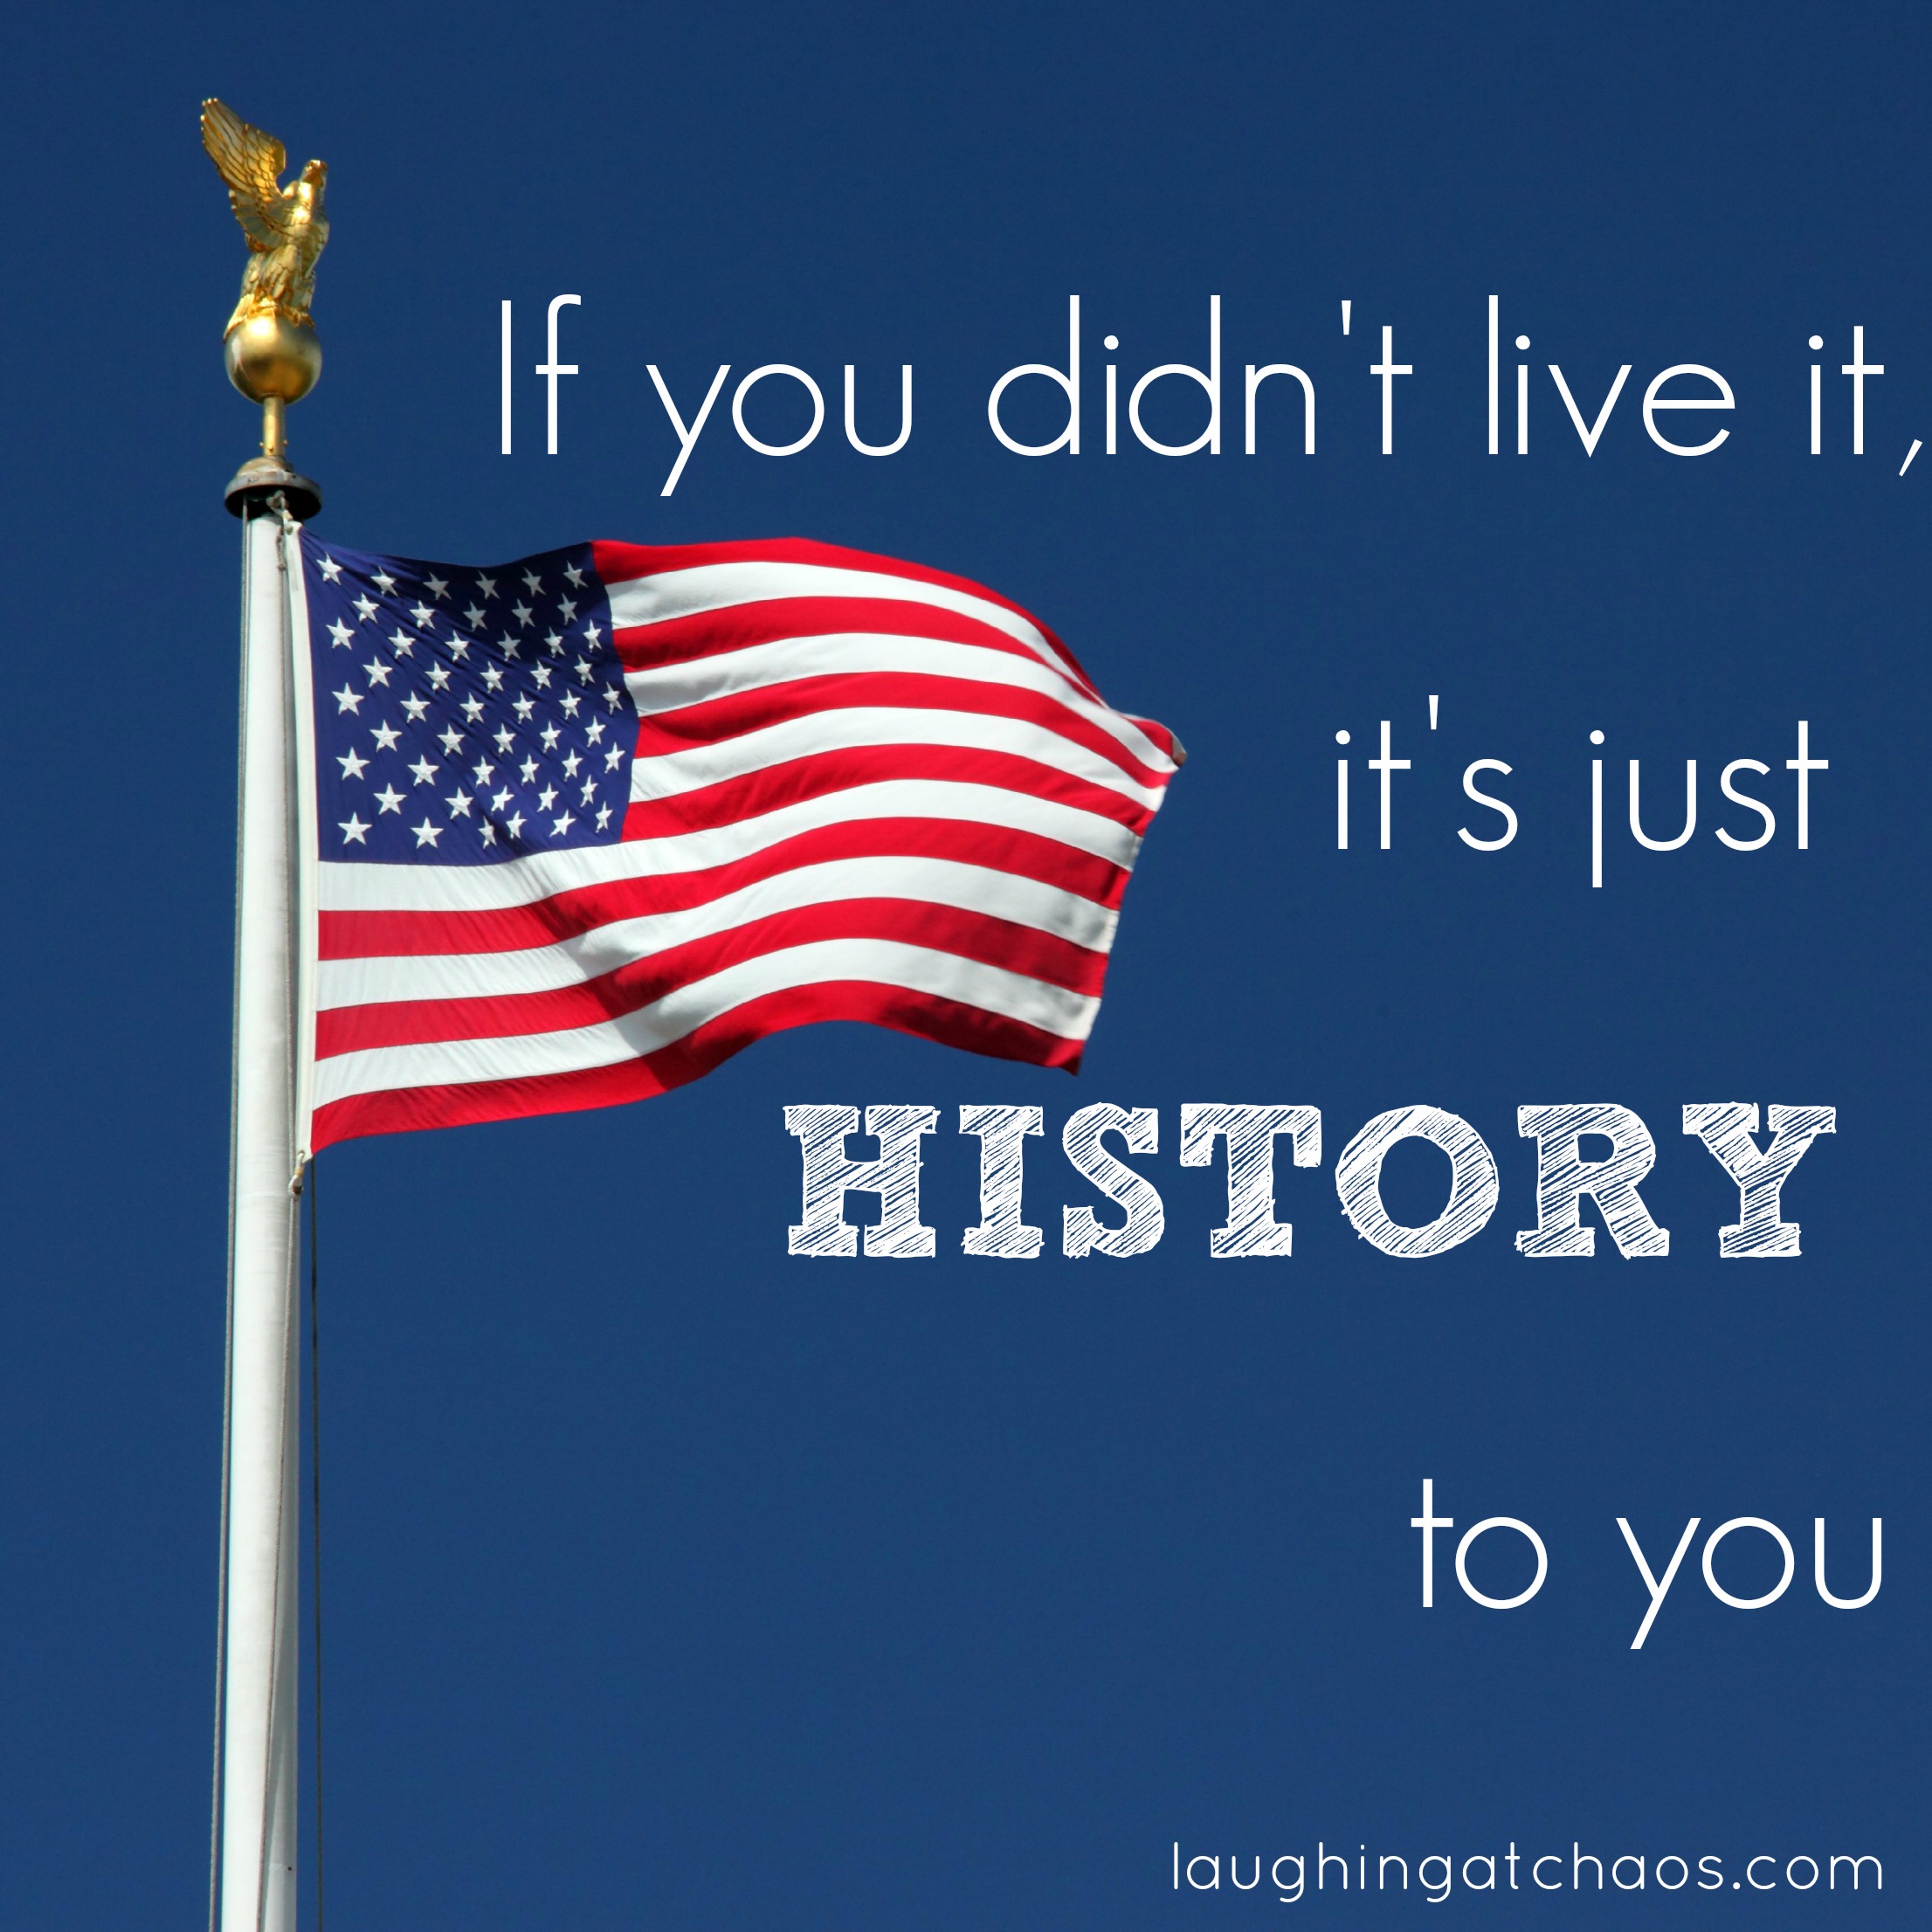 If you didn’t live it, it’s just history to you